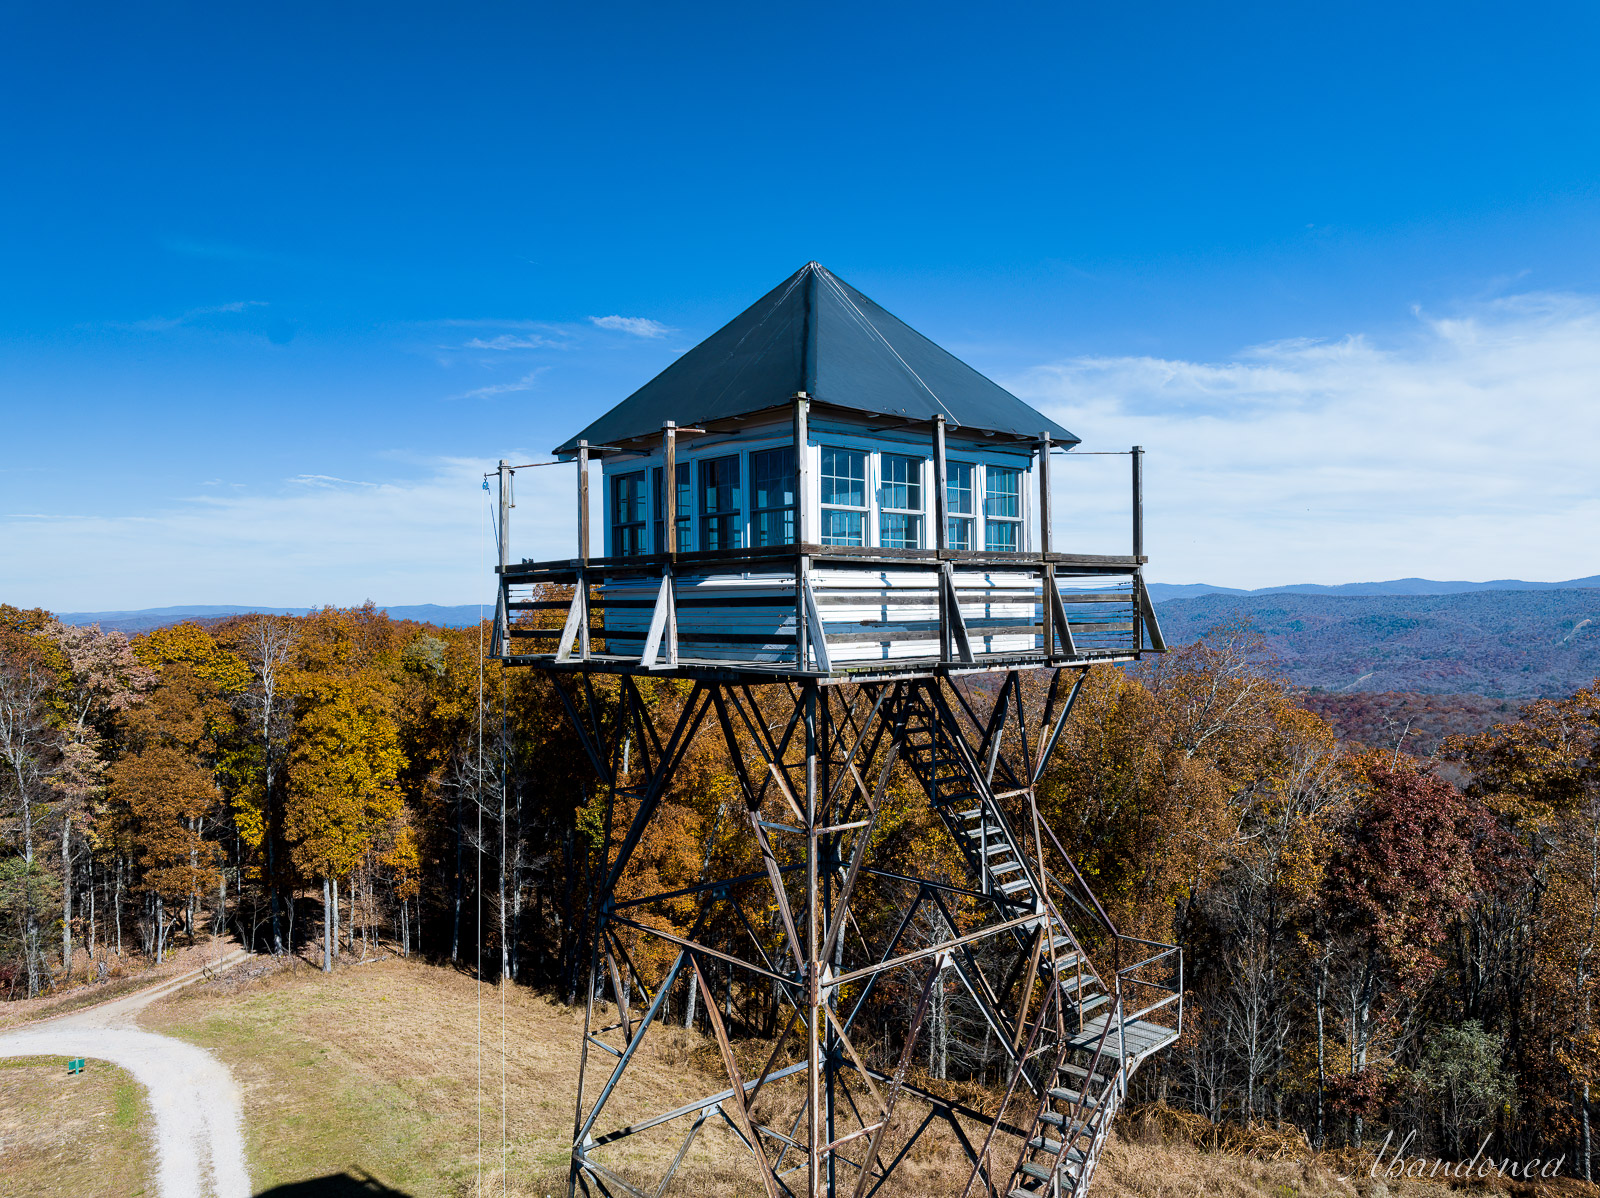 Thorny Mountain Fire Tower